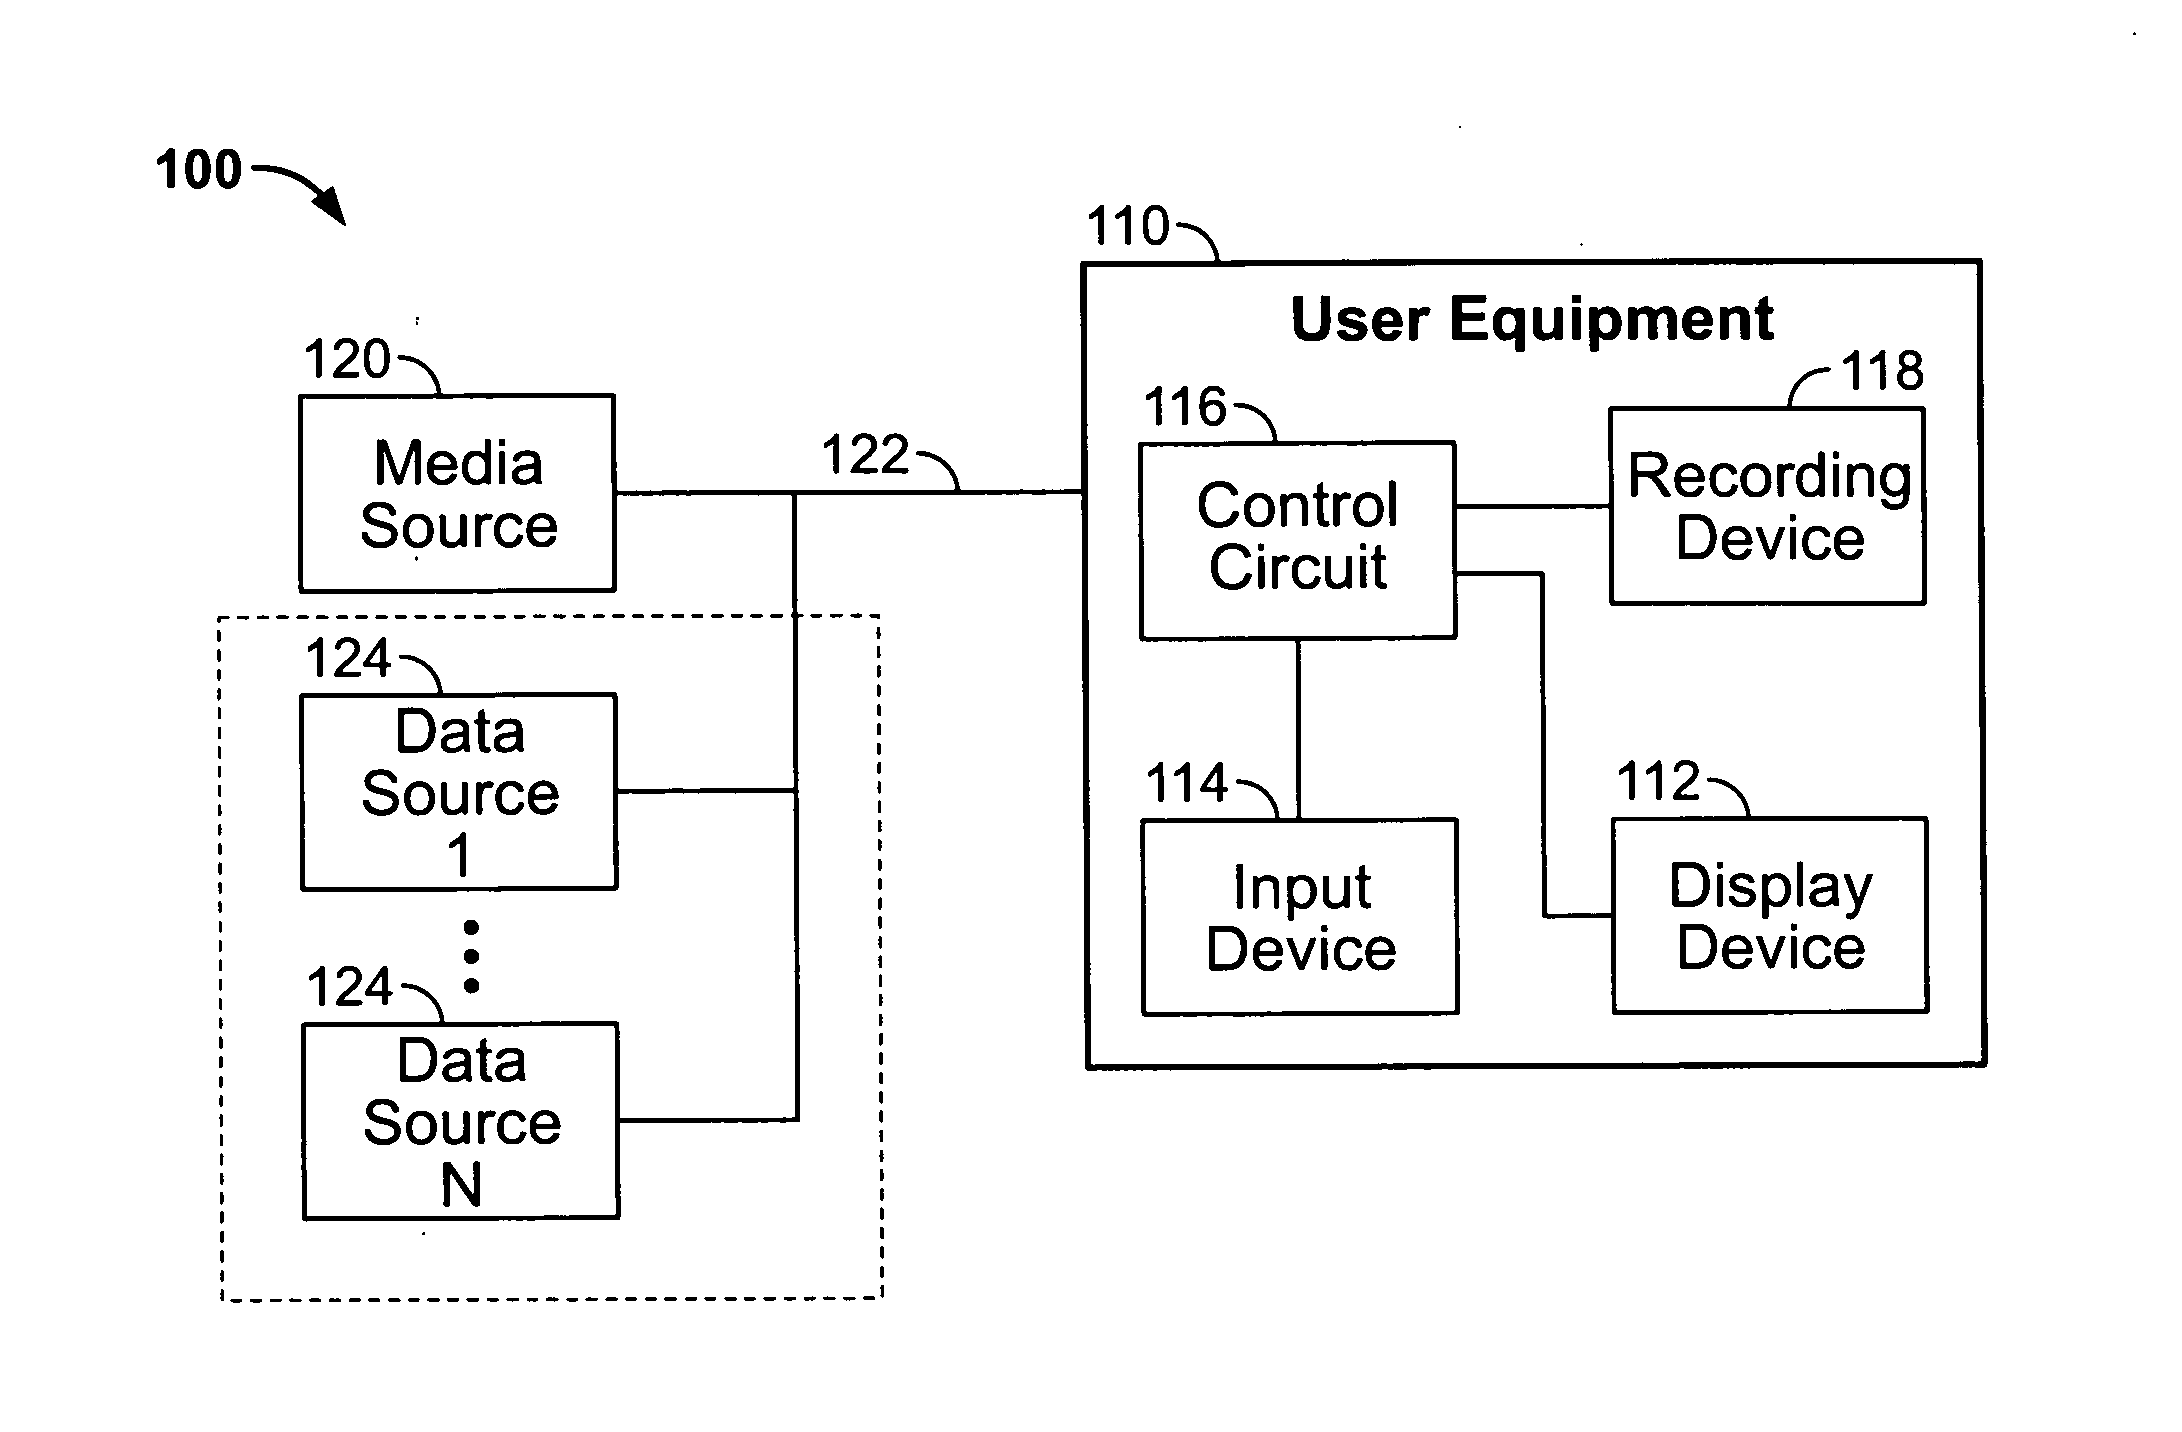 Storage management of a recording device in a multi-user system